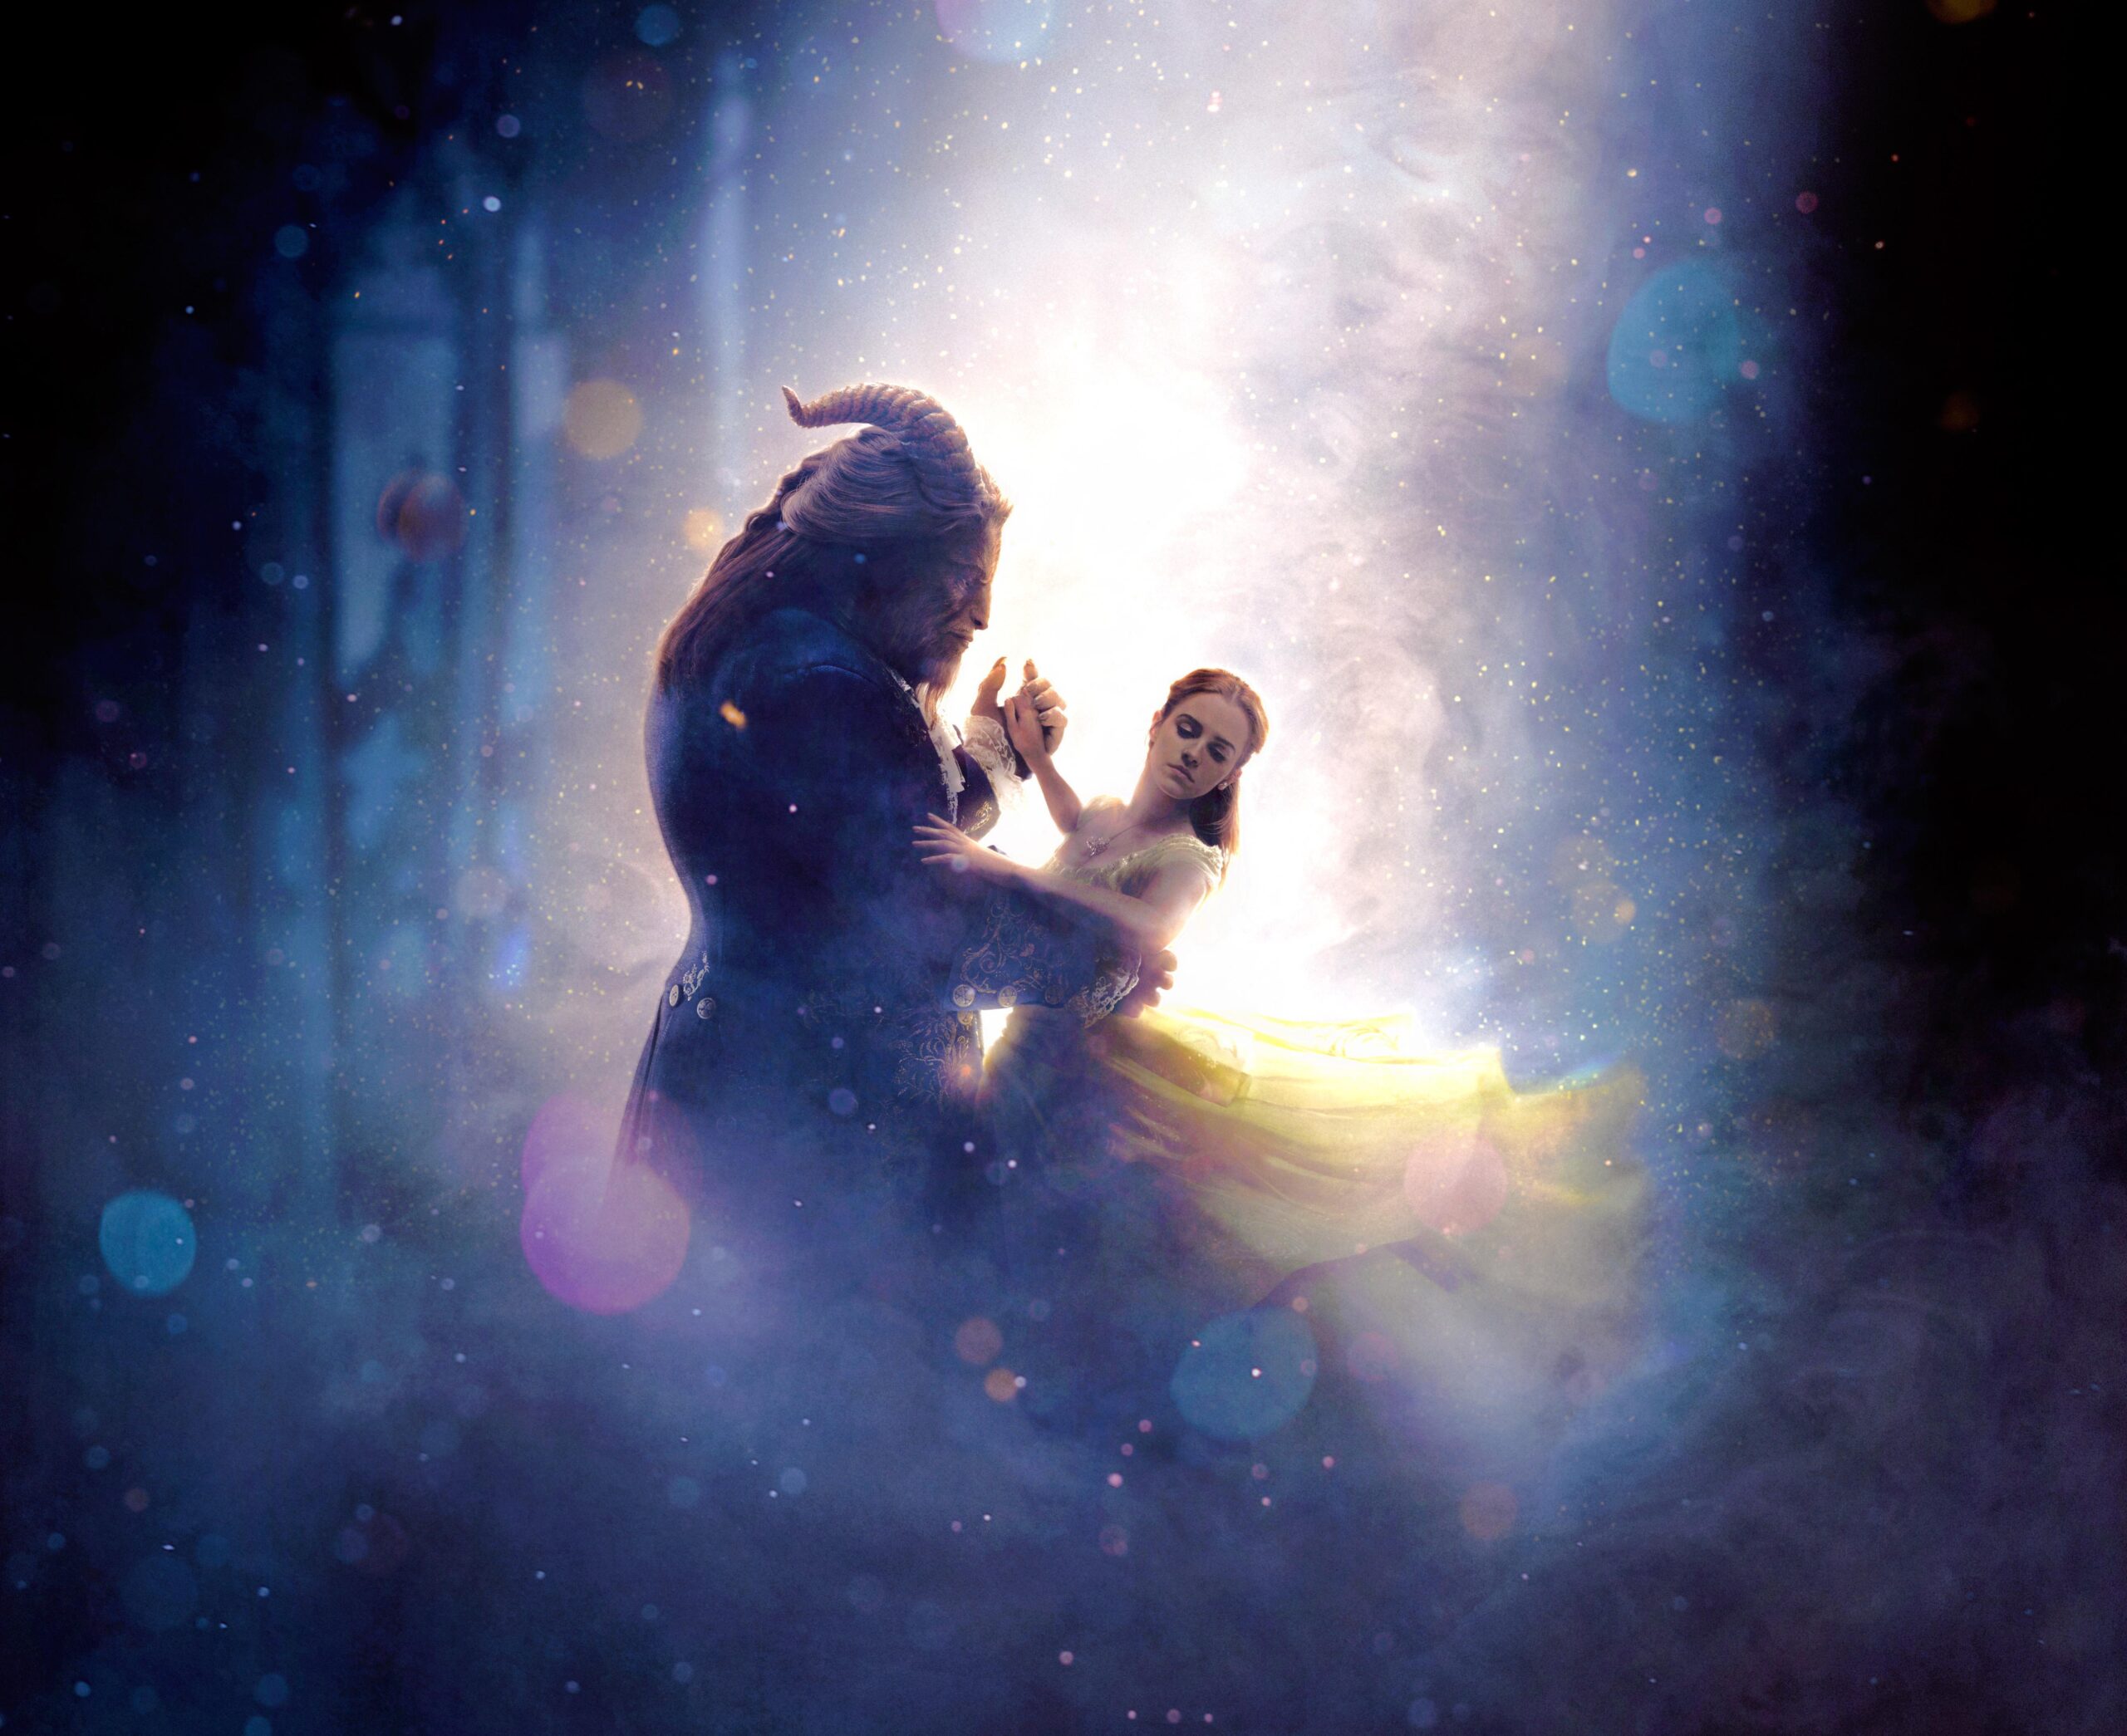 Beauty And The Beast Hd Wallpaper 4k Download Full Screen, Beauty And The Beast, Cartoons